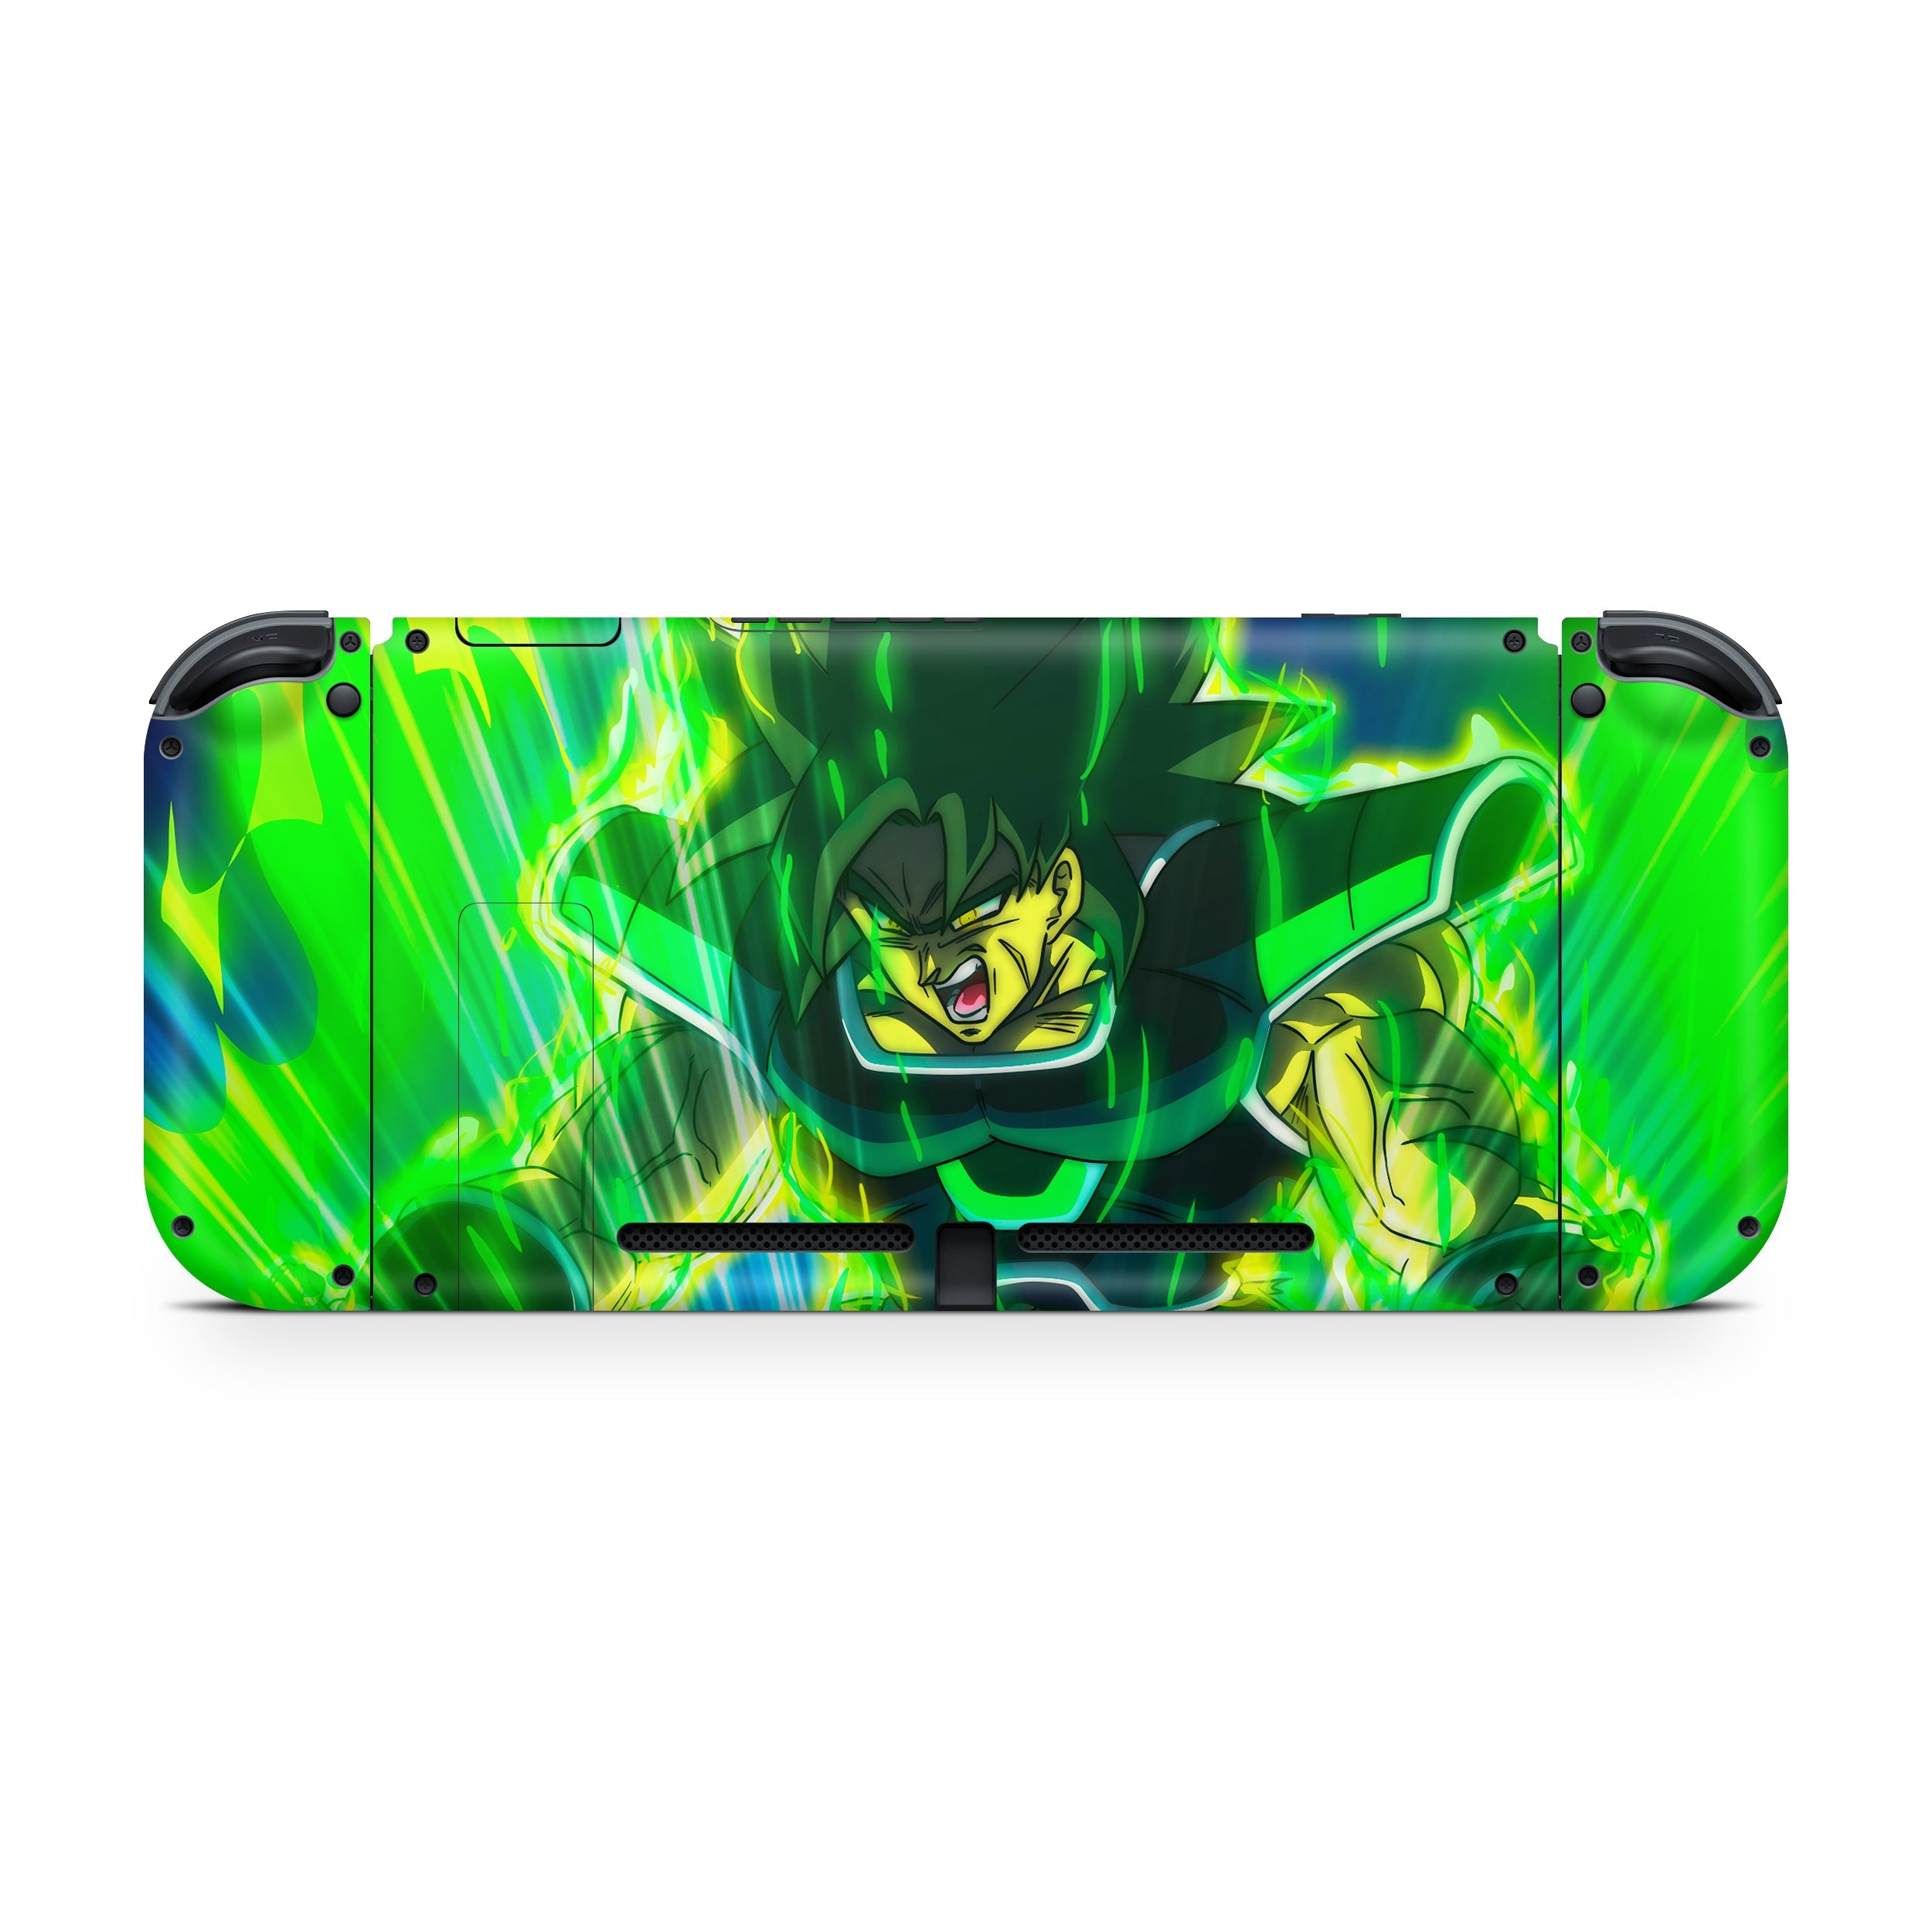 A video game skin featuring a Dragon Ball Super Broly design for the Nintendo Switch.